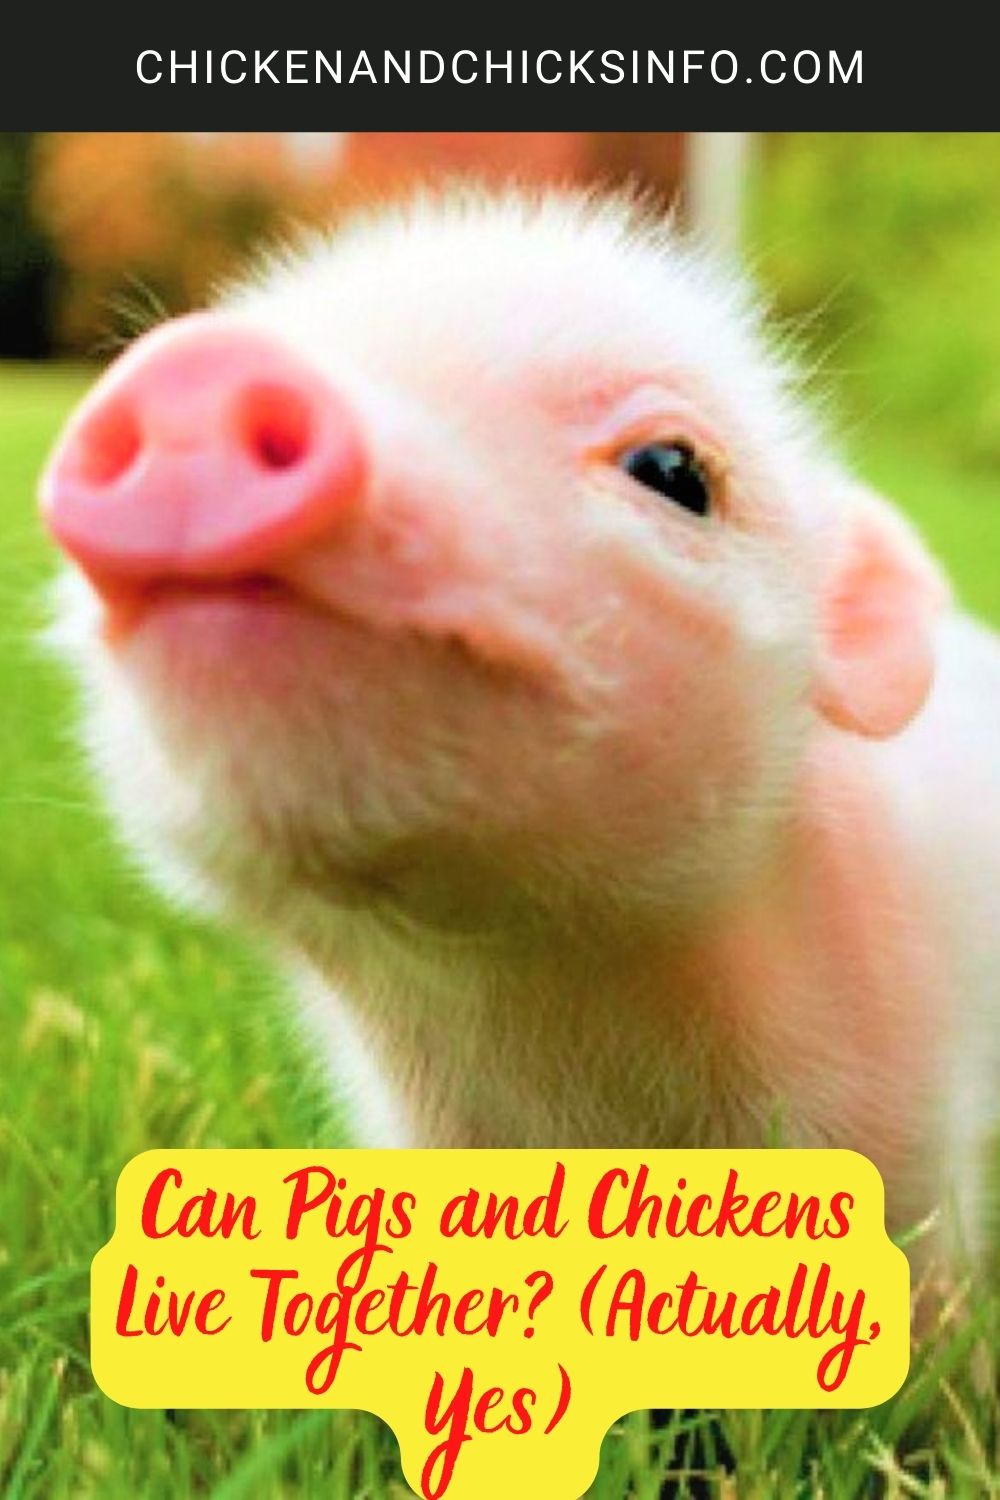 Can Pigs and Chickens Live Together? (Actually, Yes) poster.
